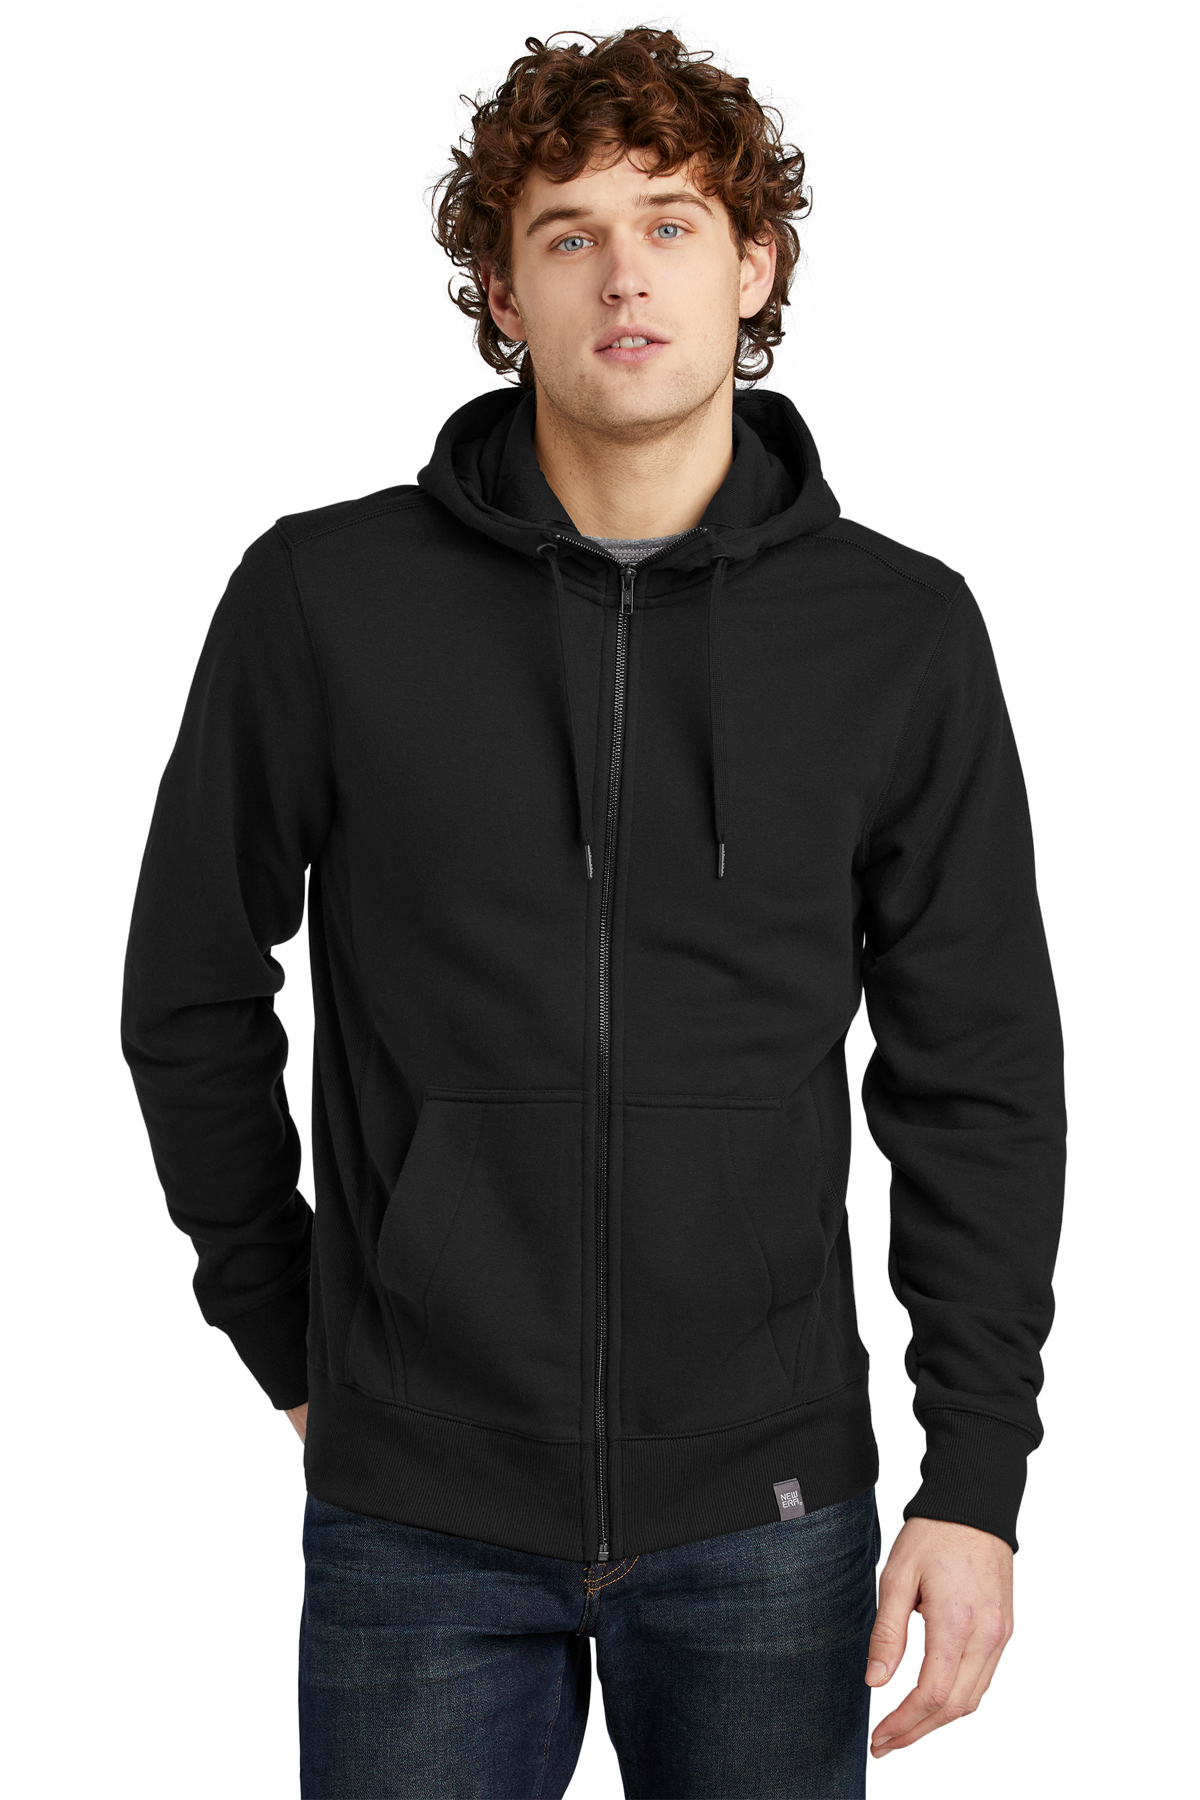 New Era ® French Terry Full-Zip Hoodie | Product | Company Casuals